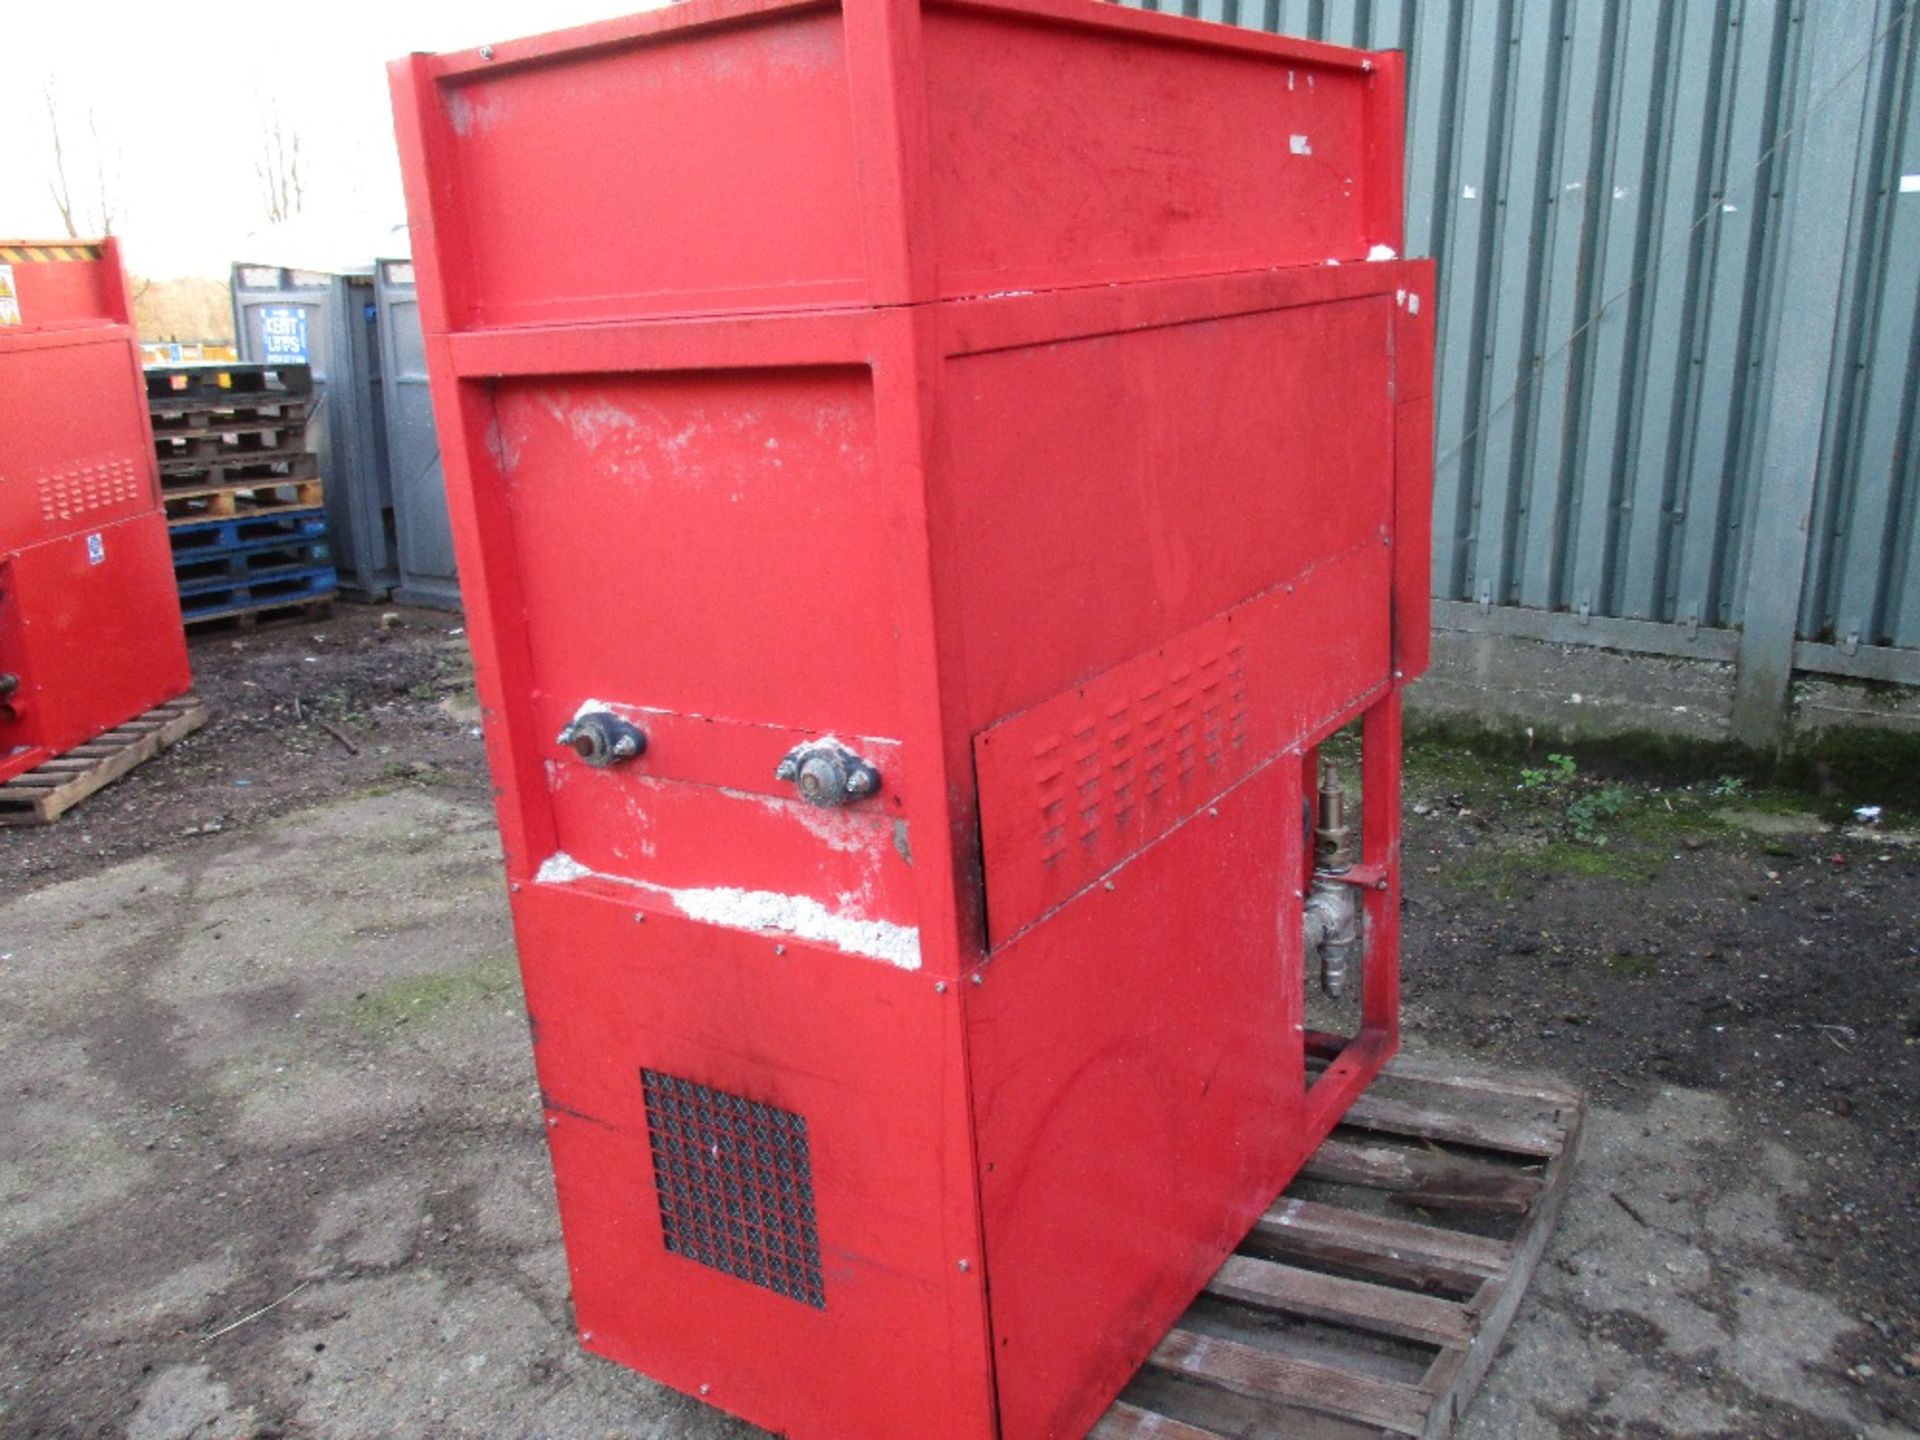 Stewart Energy Lister engined blown insulation machine sourced from company liquidation. - Image 3 of 6